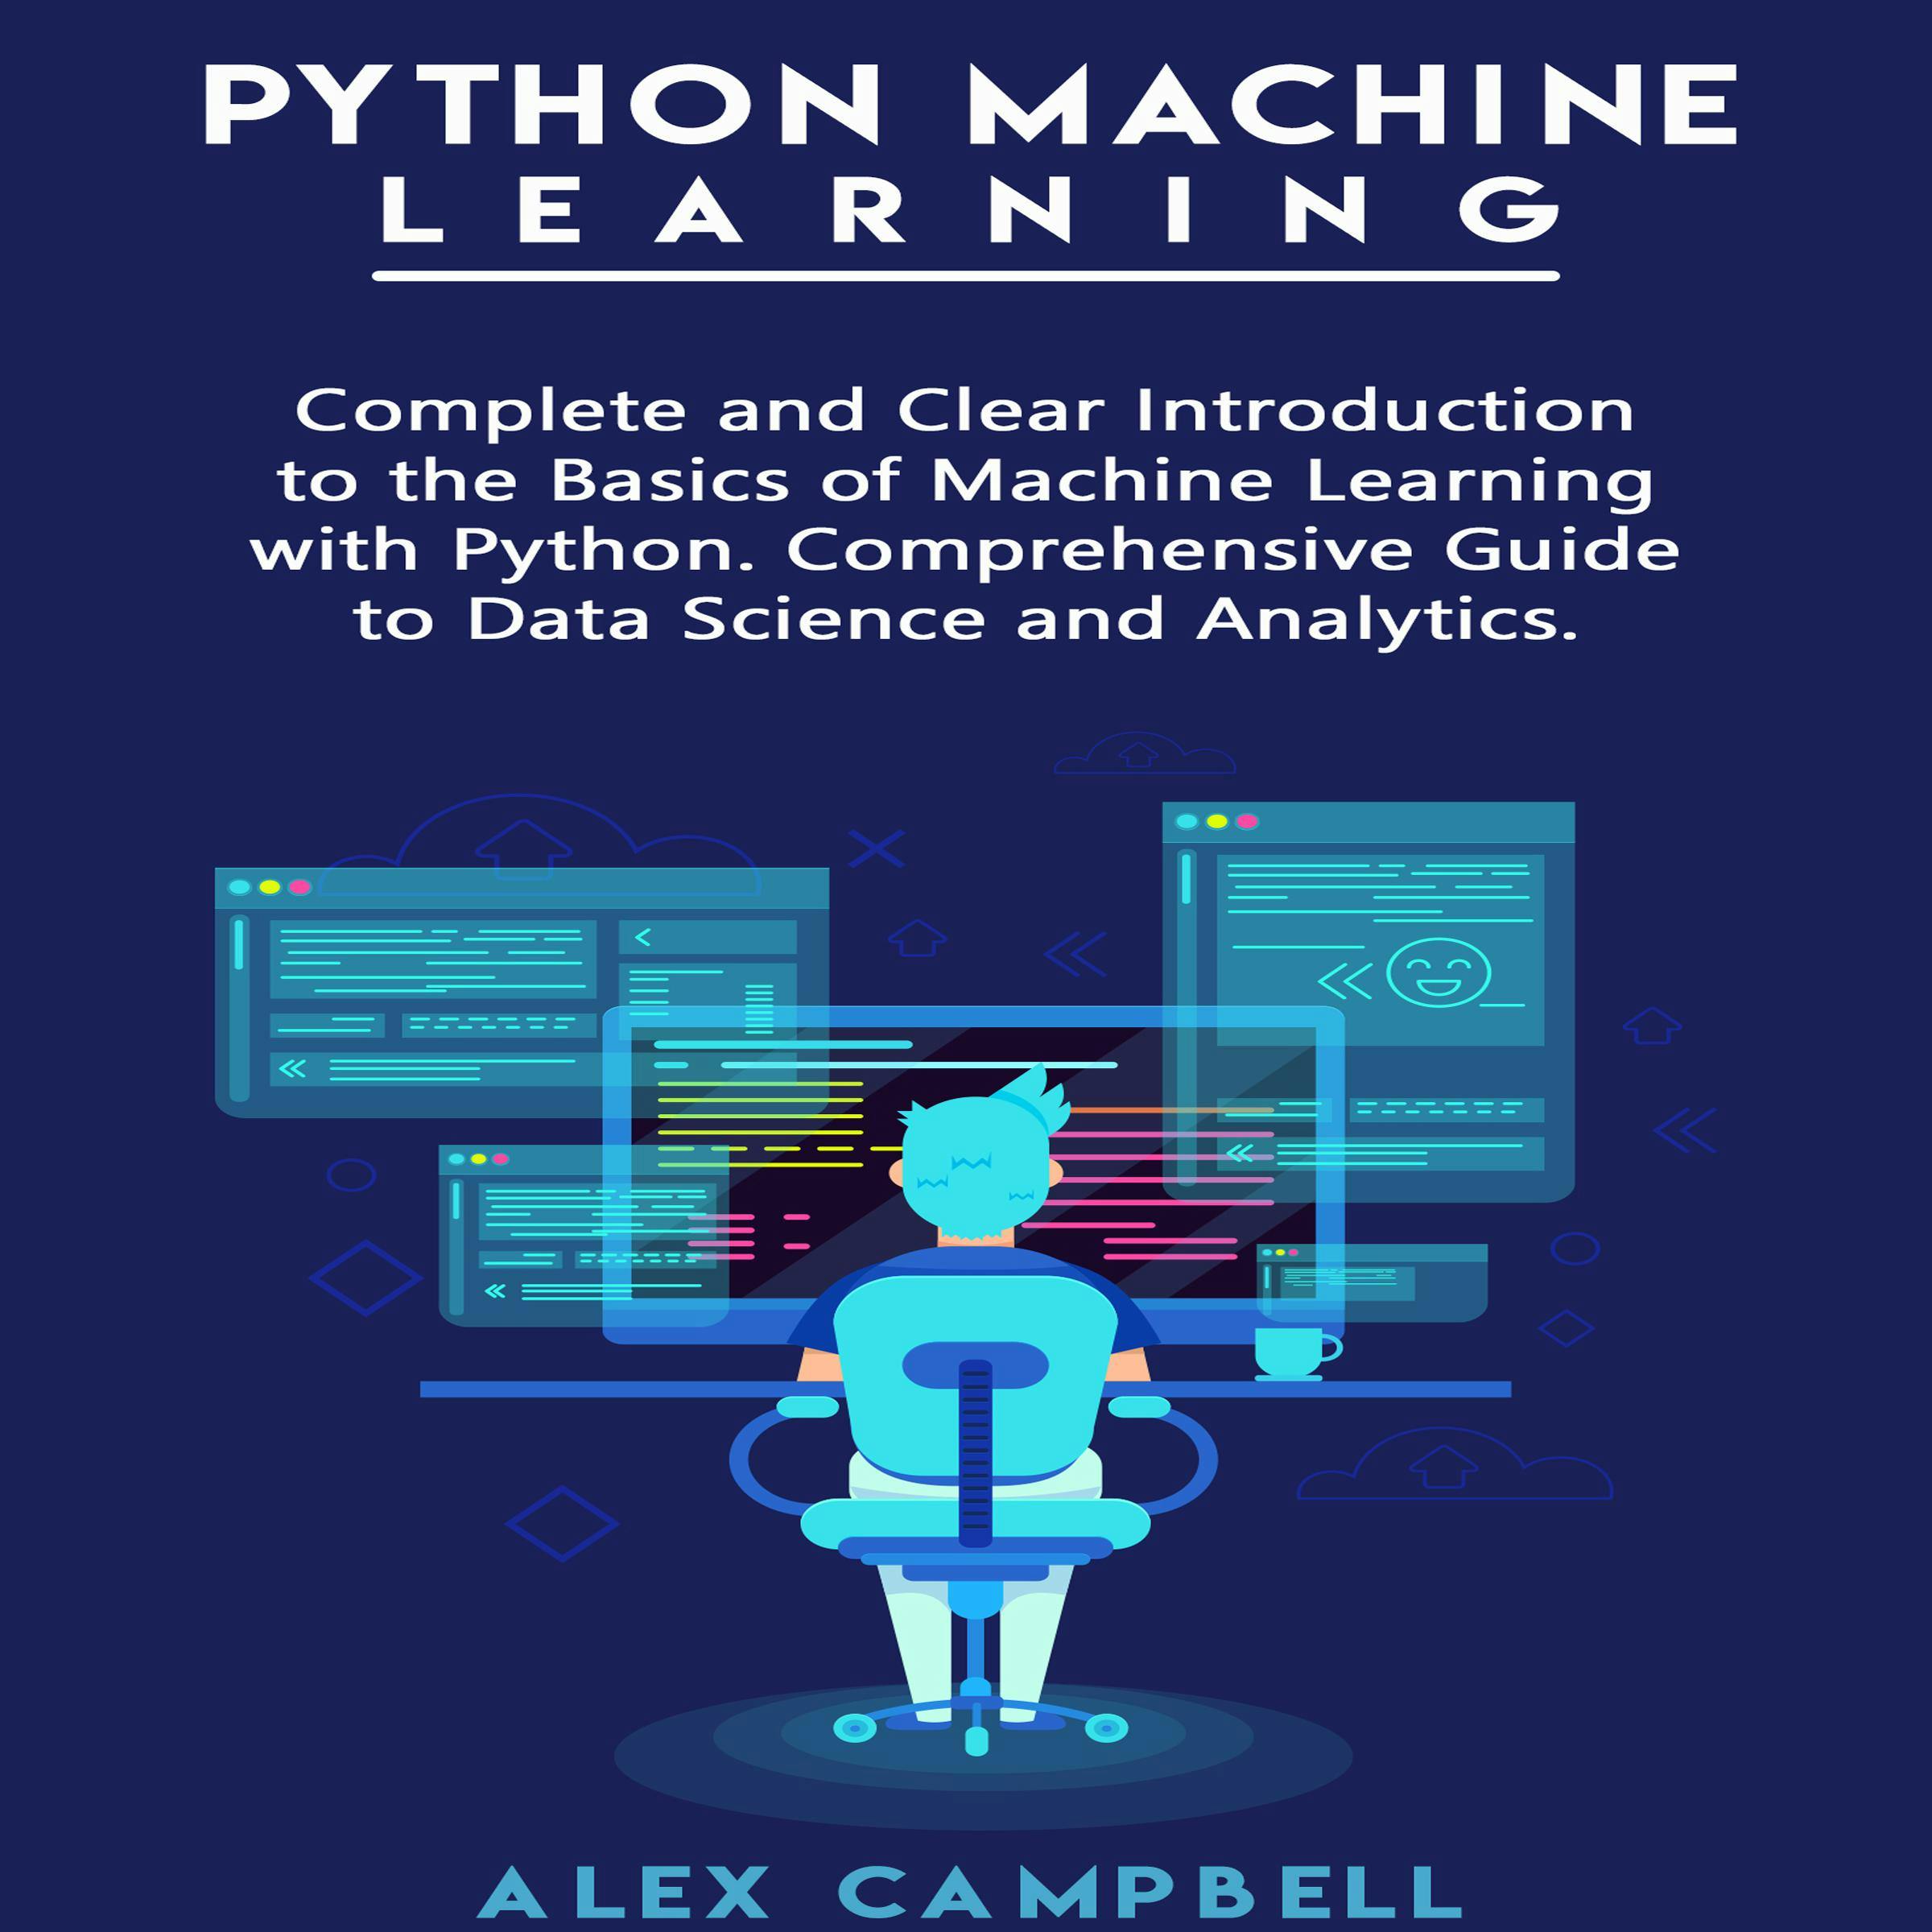 Python Machine Learning: Complete and Clear Introduction to the Basics of Machine Learning with Python. Comprehensive Guide to Data Science and Analytics. - Alex Campbell